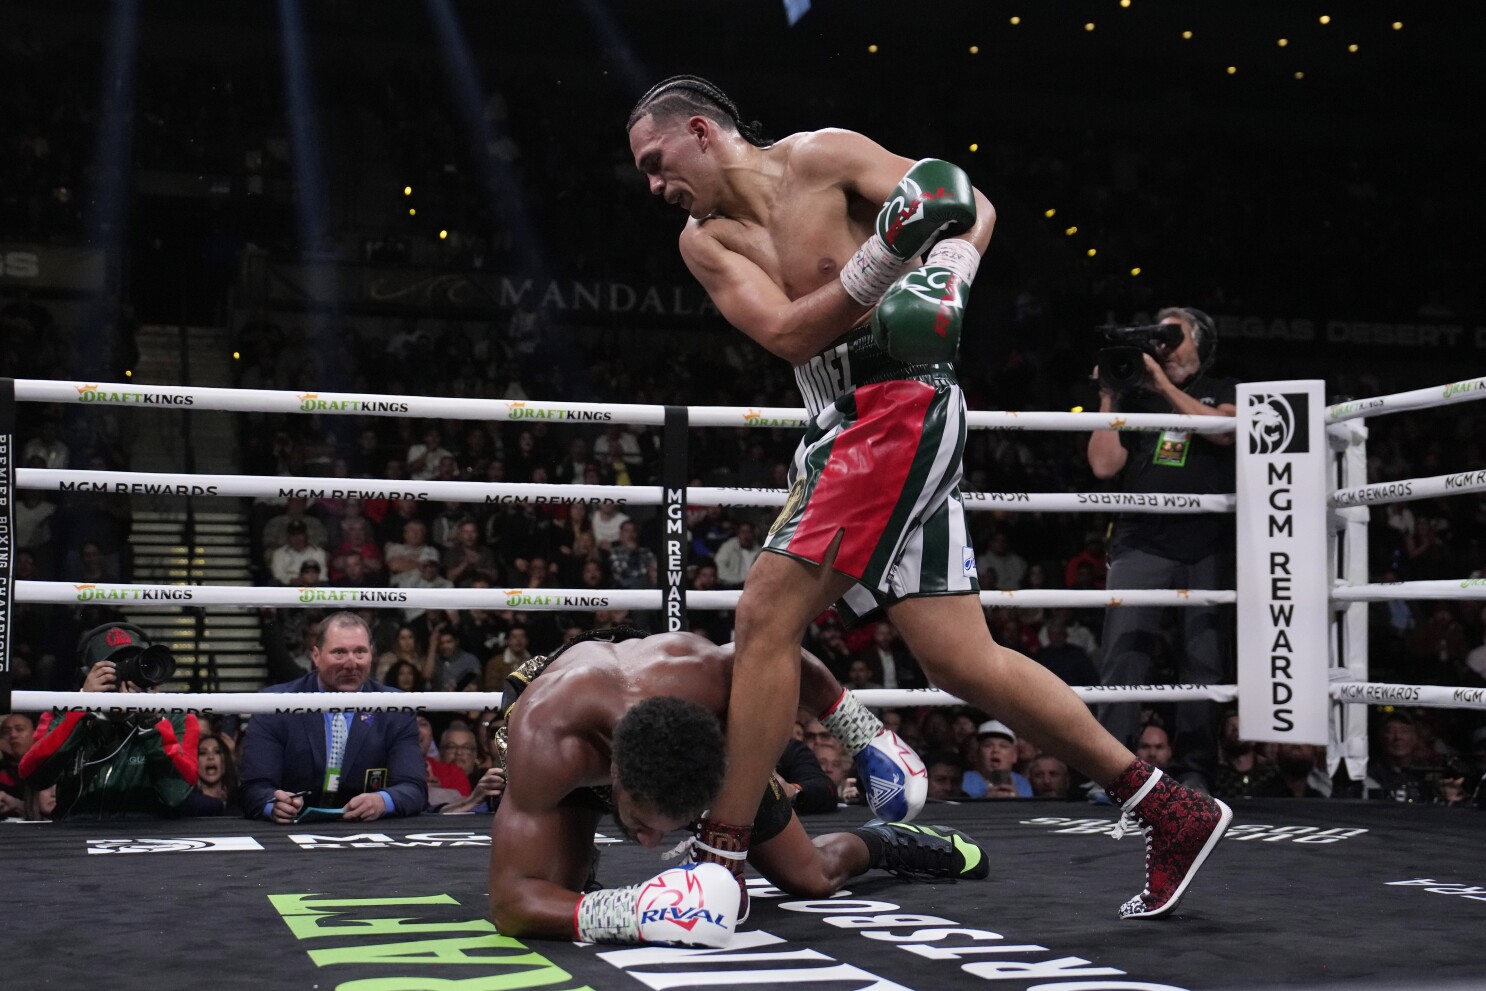 Benavidez stops Andrade after six rounds, calls for fight with